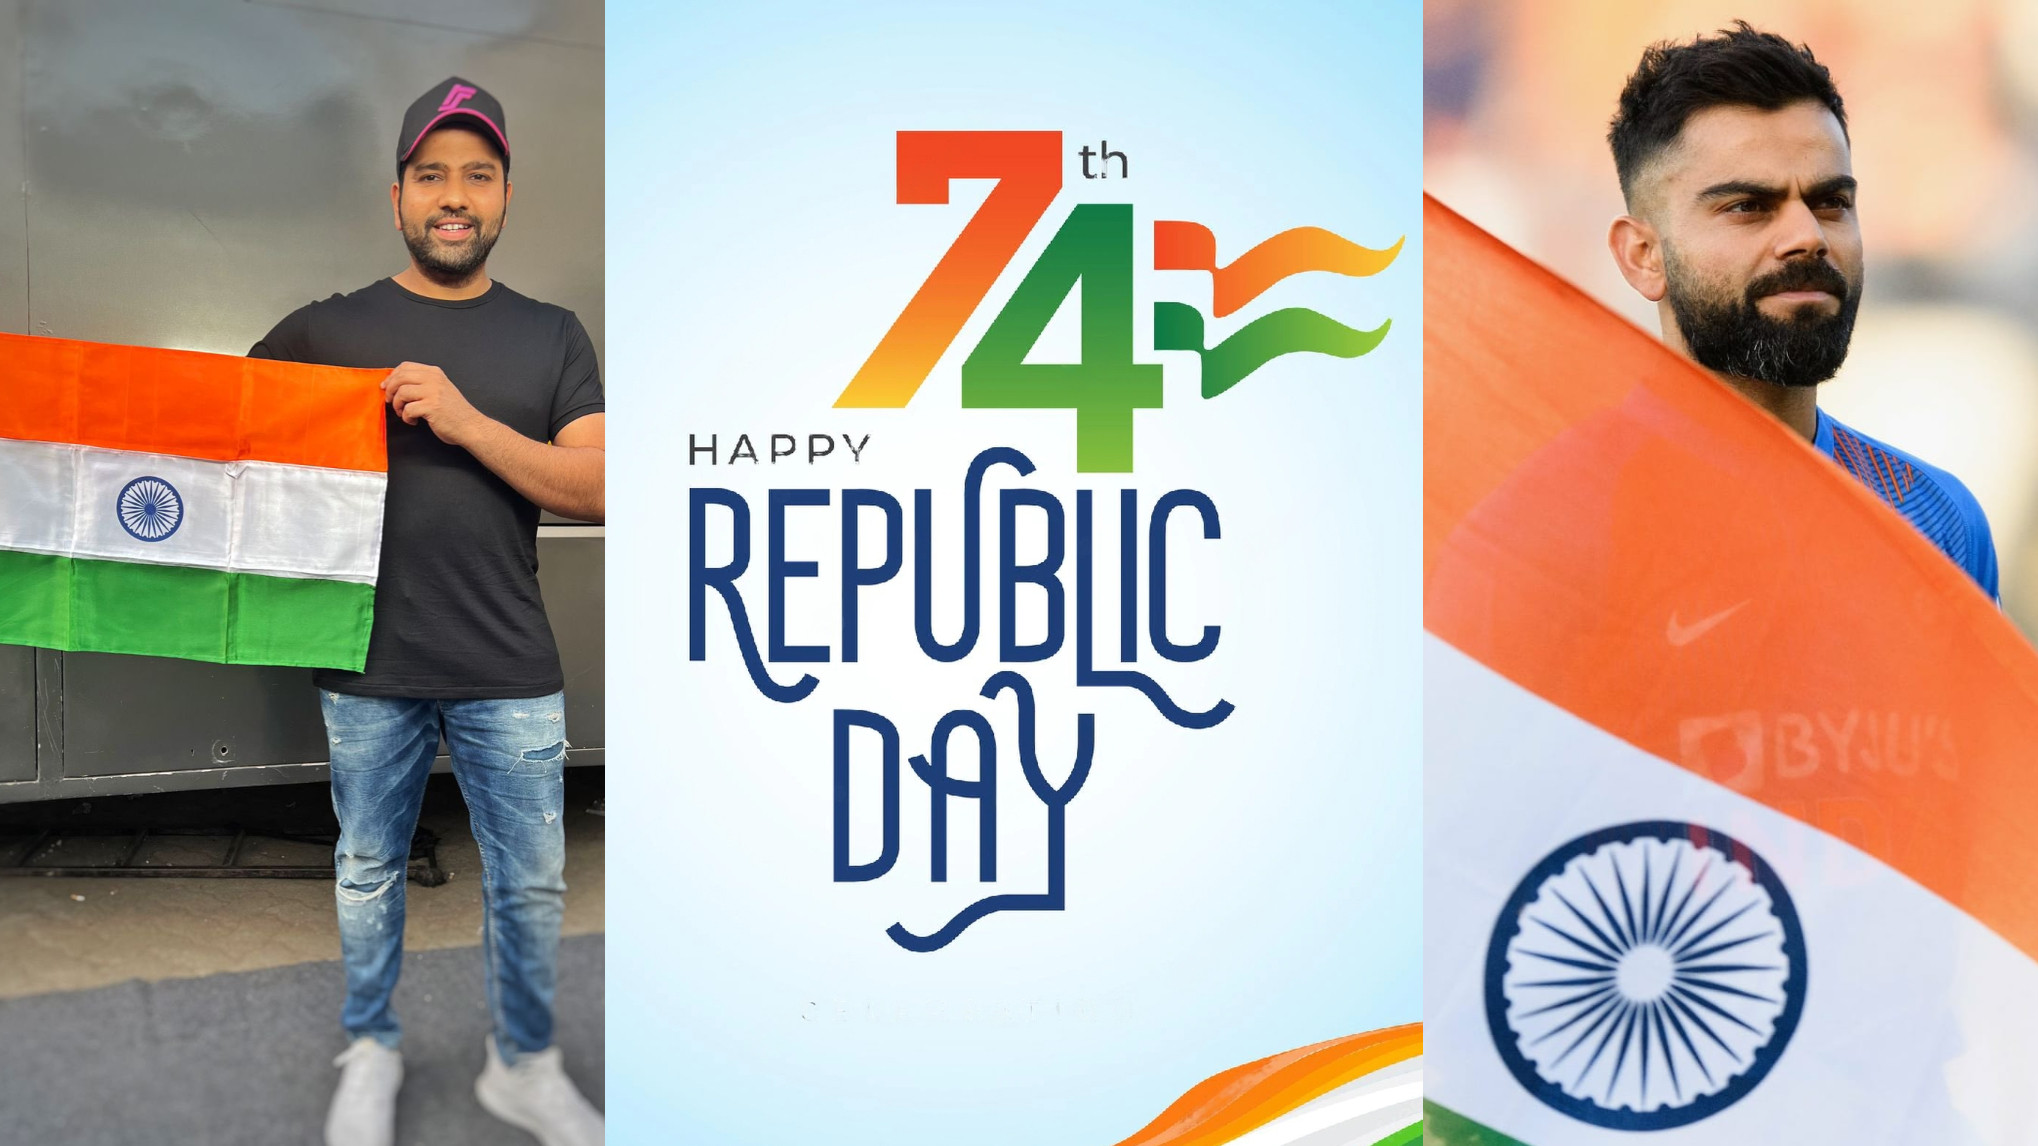 Team India sends wishes on 74th Republic Day 